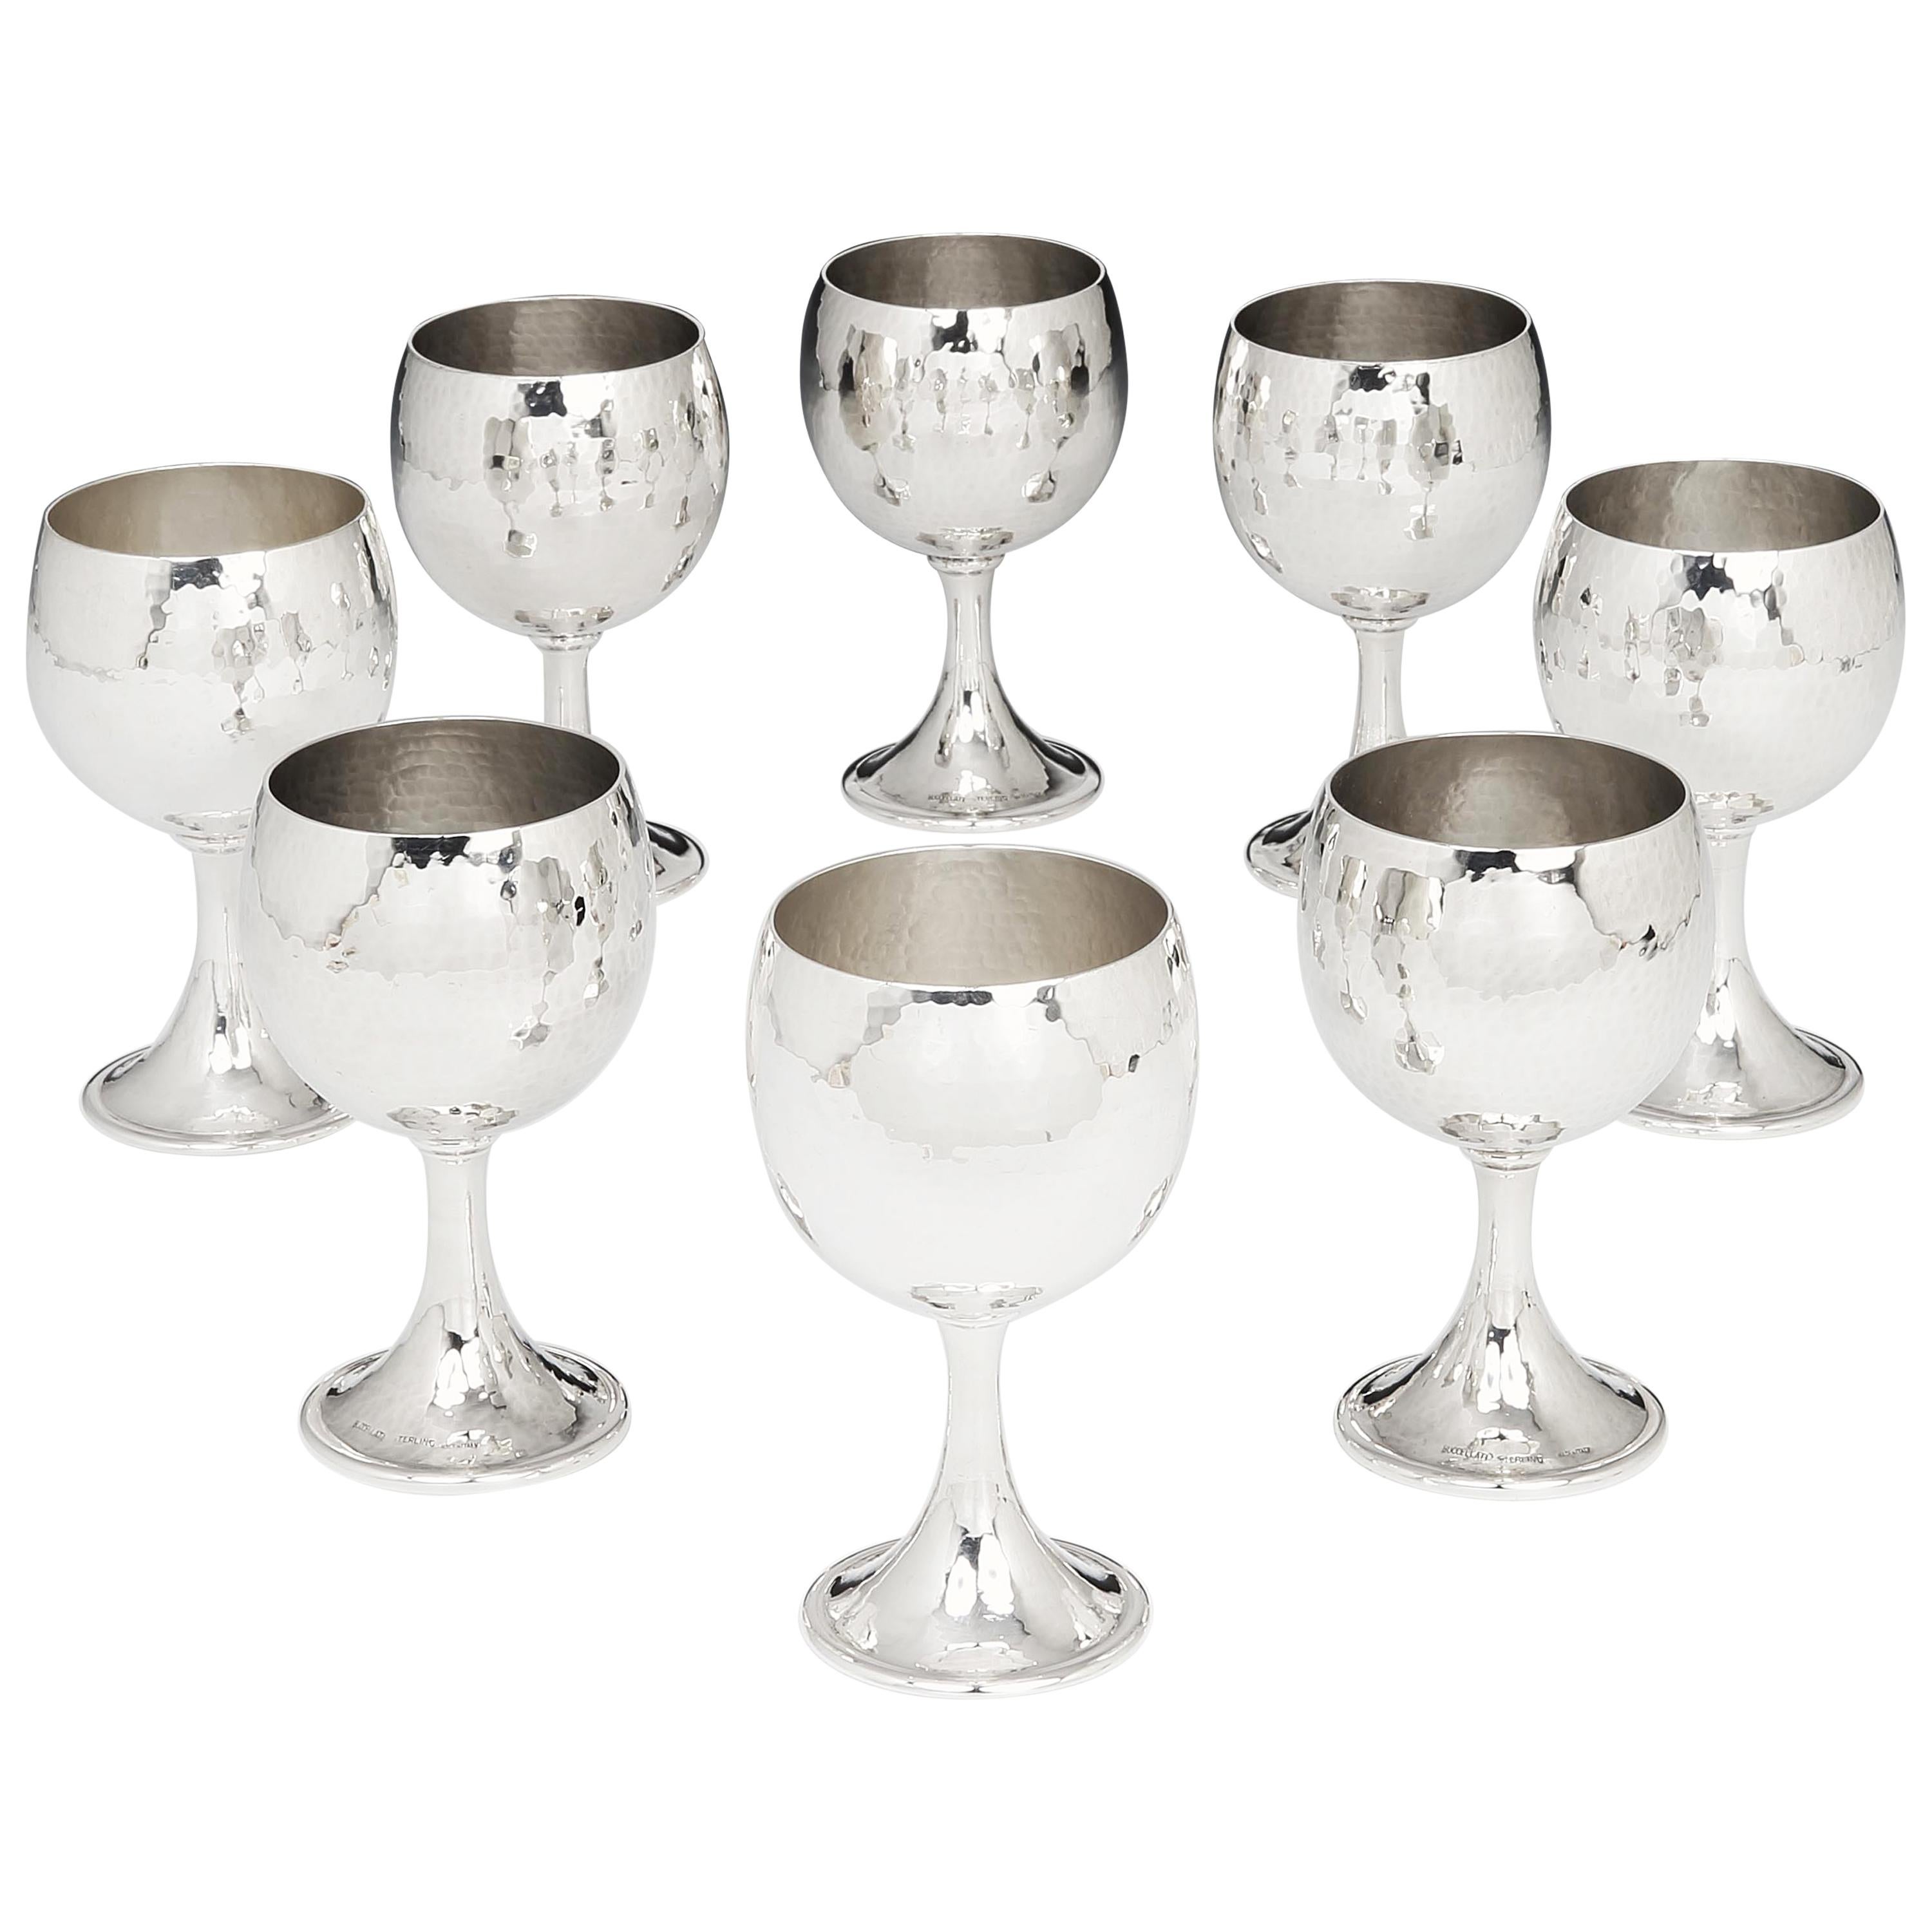 Hammered Sterling Silver Champagne Goblets by Buccellati, circa 1990s For Sale